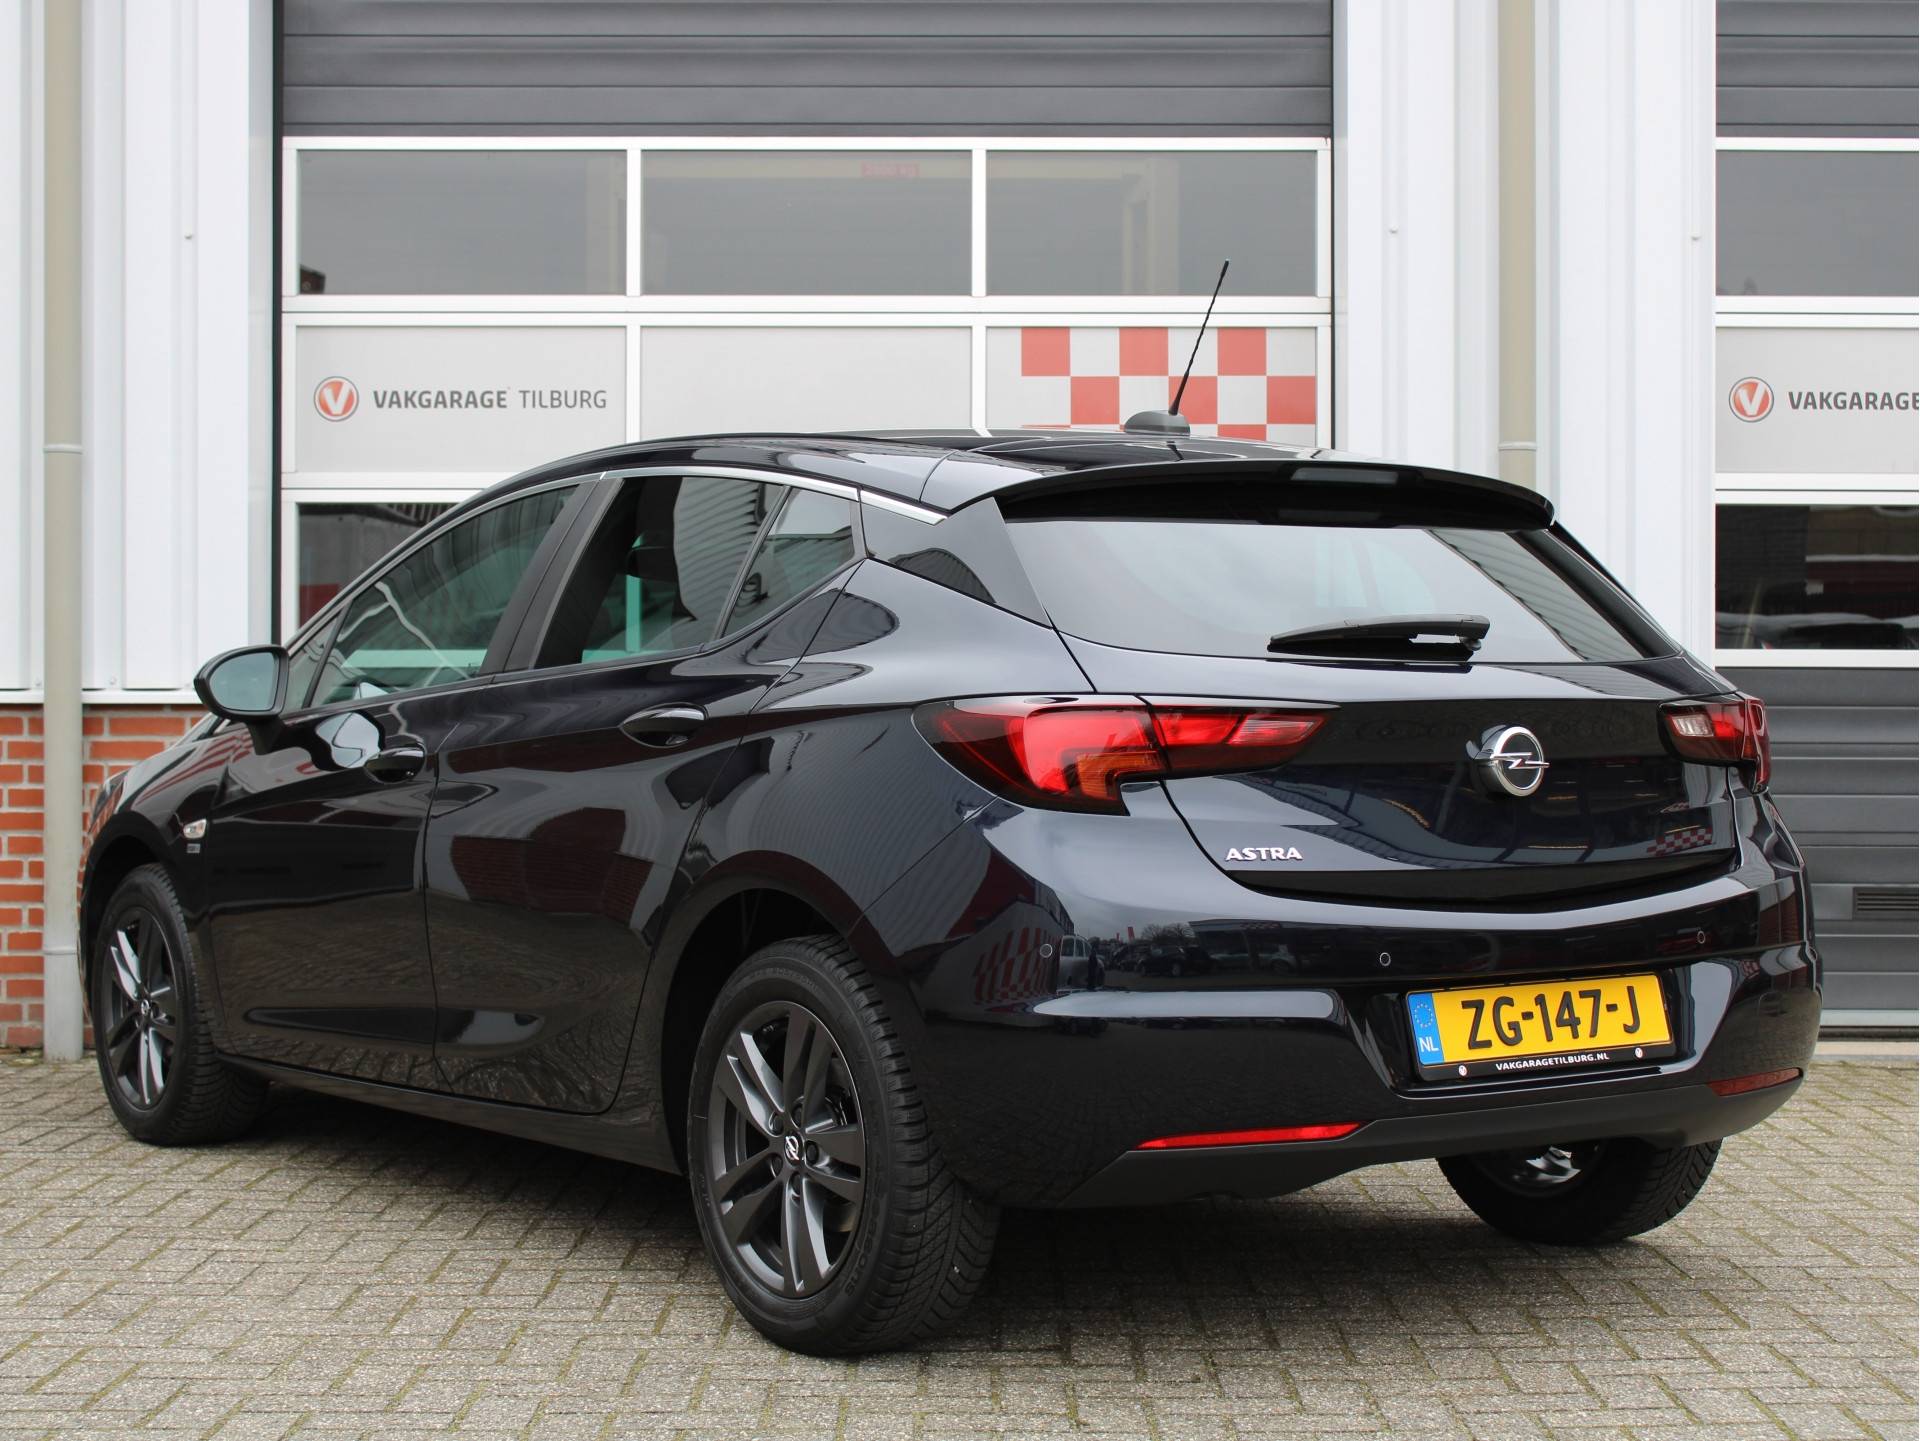 Opel Astra 1.4 Turbo 120Jaar Edition 150PK Automaat /NAVI/PDC/Climate/Cruise control/DAB+/LED/Apple carplay/Android auto/Donker glas/NAP! 1e eig! - 3/41